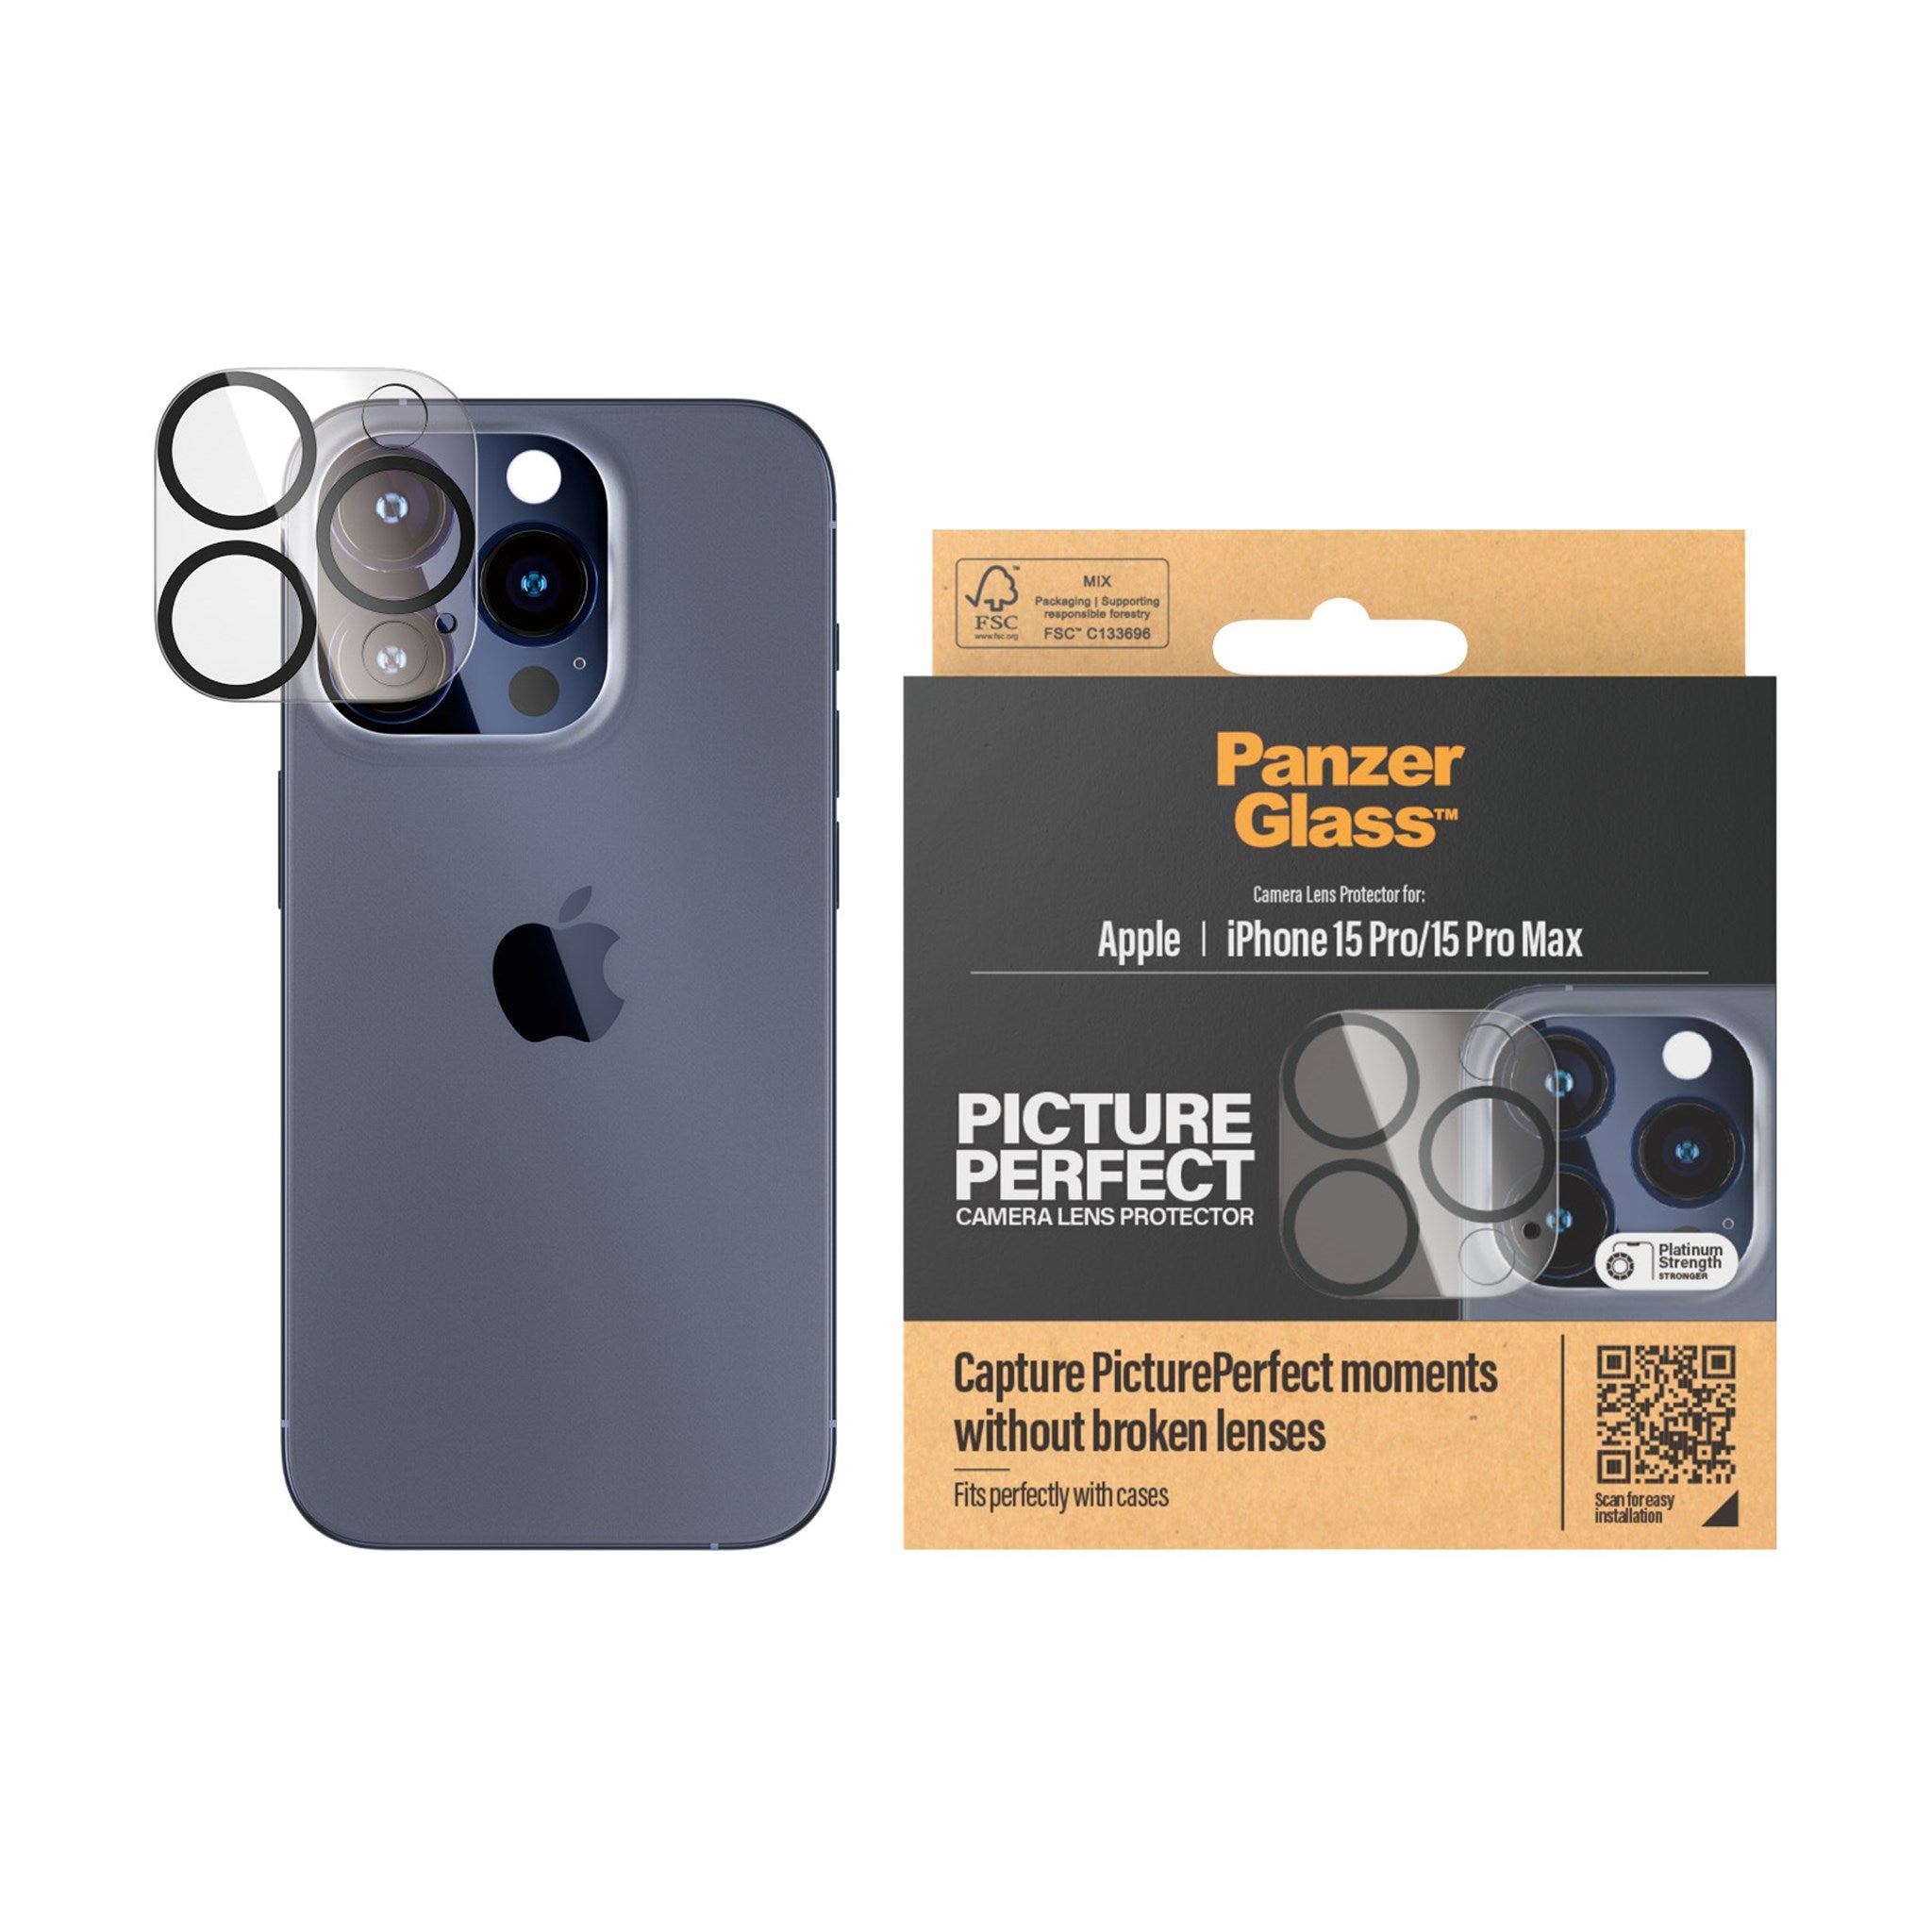 PanzerGlass® PicturePerfect Camera Lens Protector iPhone 15 Pro